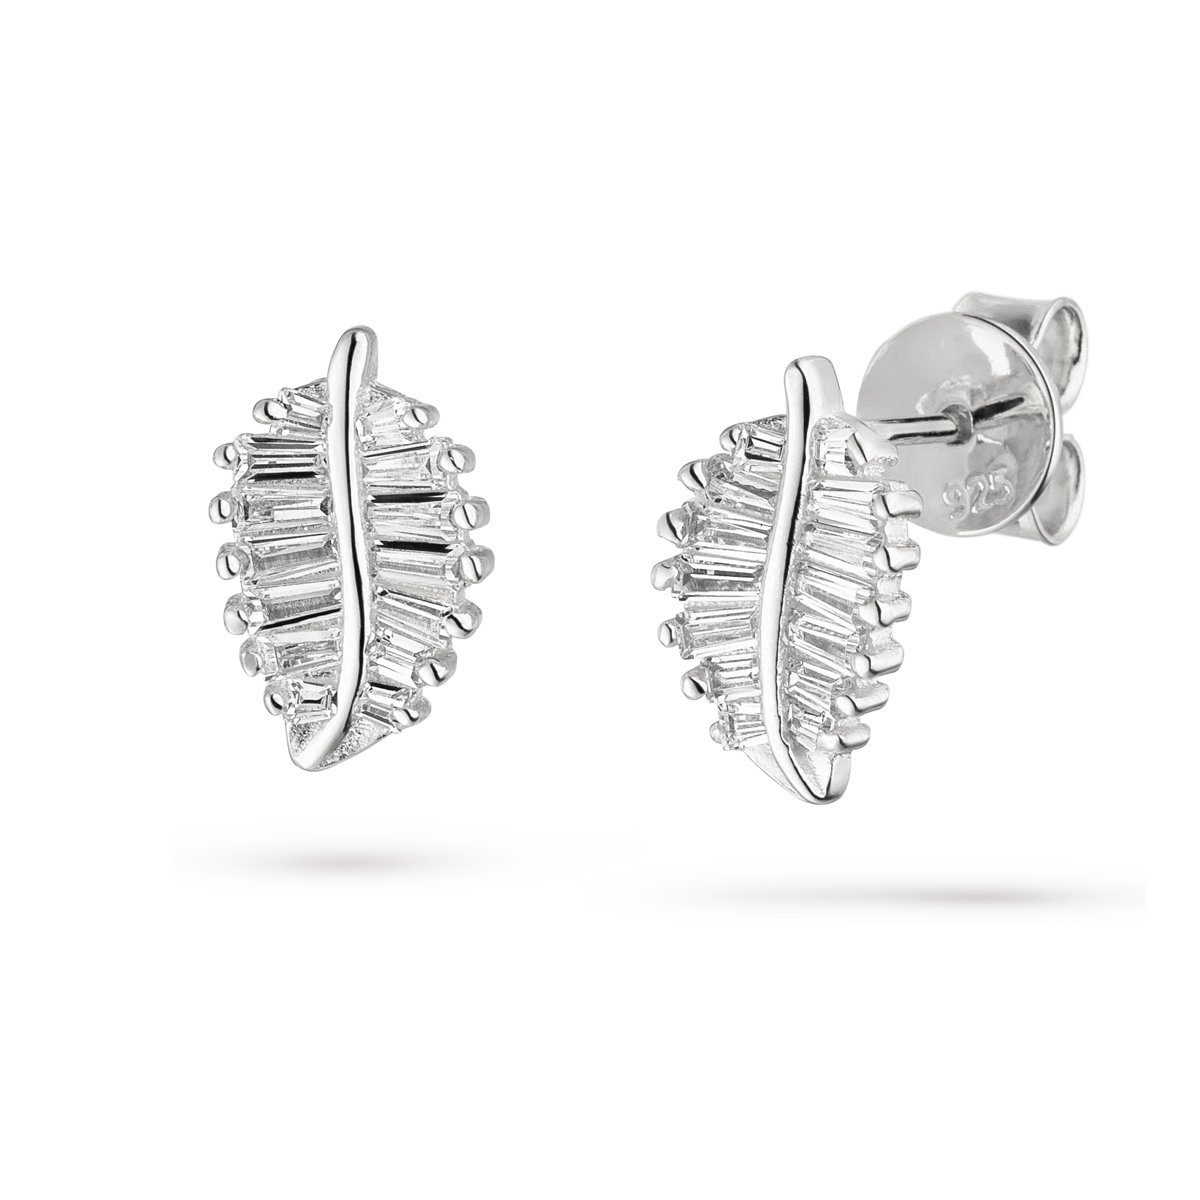 Sterling Fiocco Paar Bella Jewelry Ohrringe, 925 Ohrstecker Silber